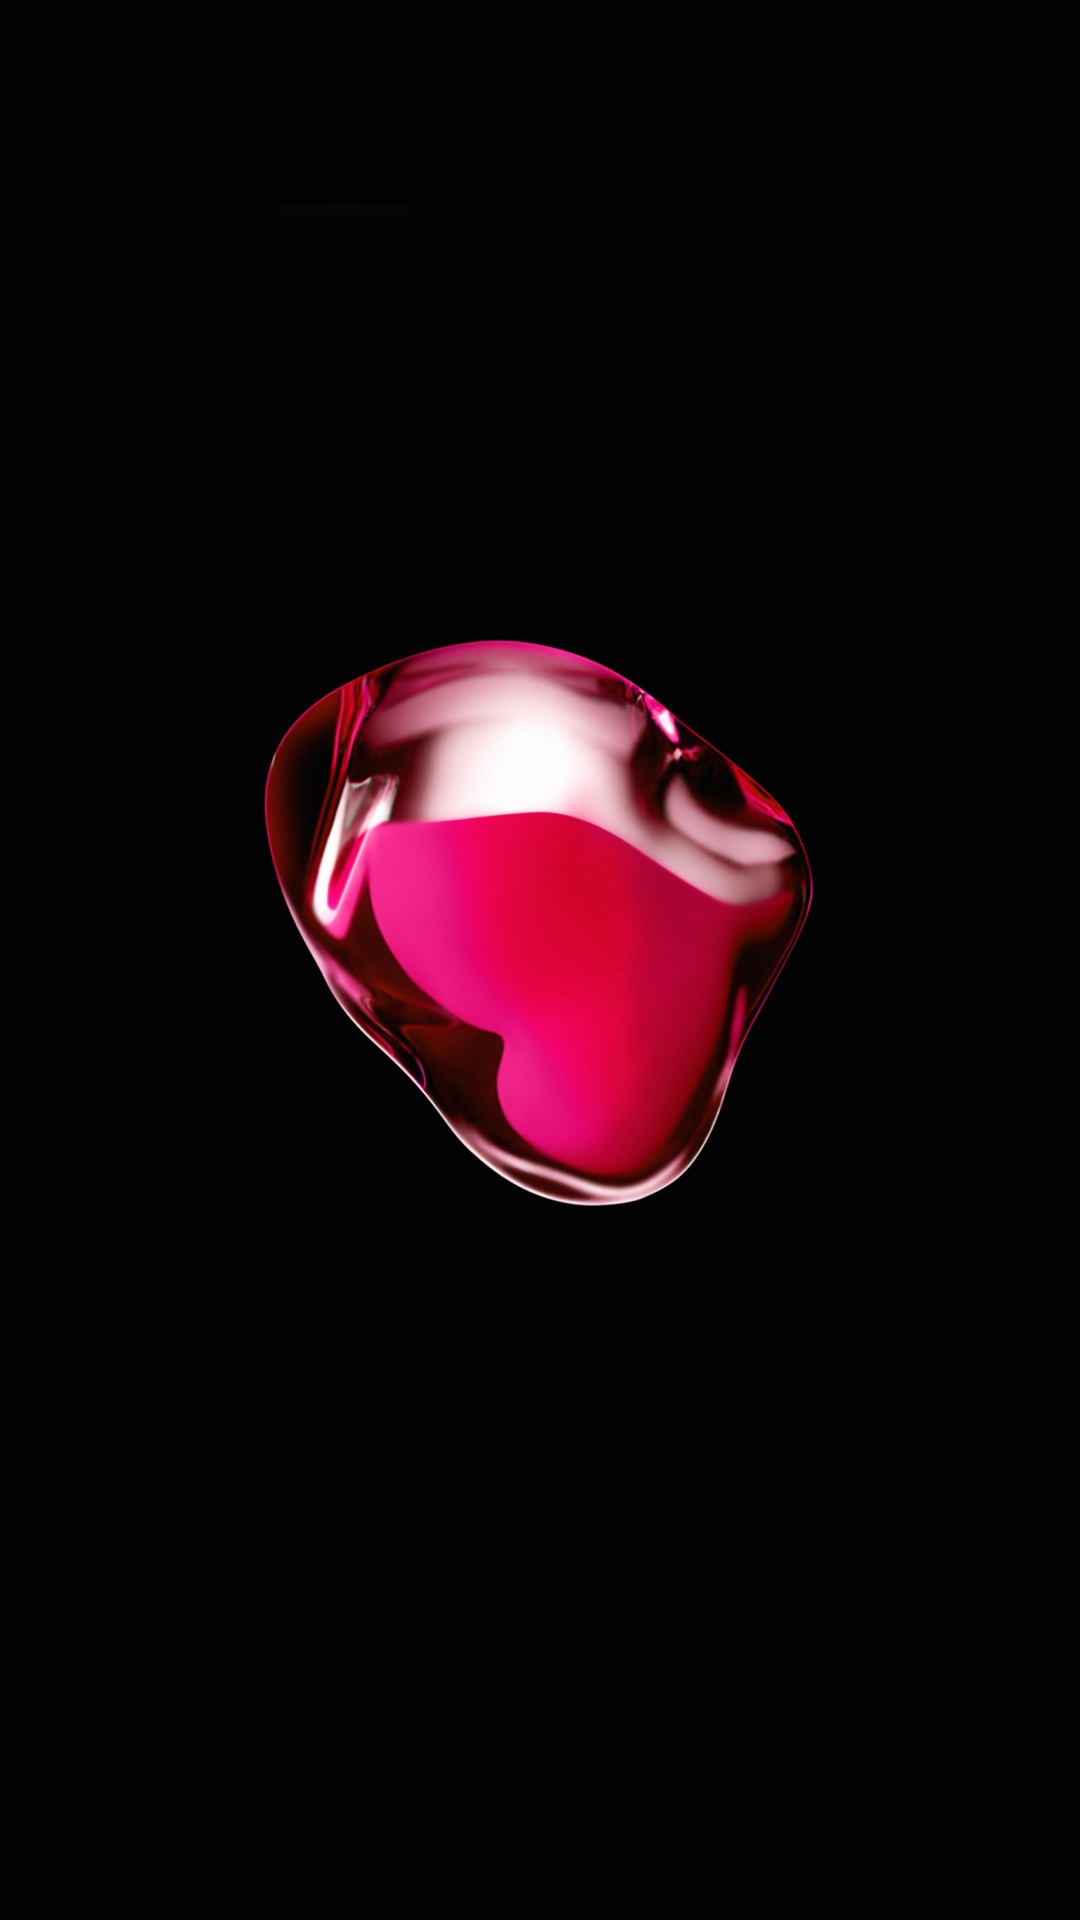 Pink and Silver Heart Ornament. Wallpaper in 1080x1920 Resolution